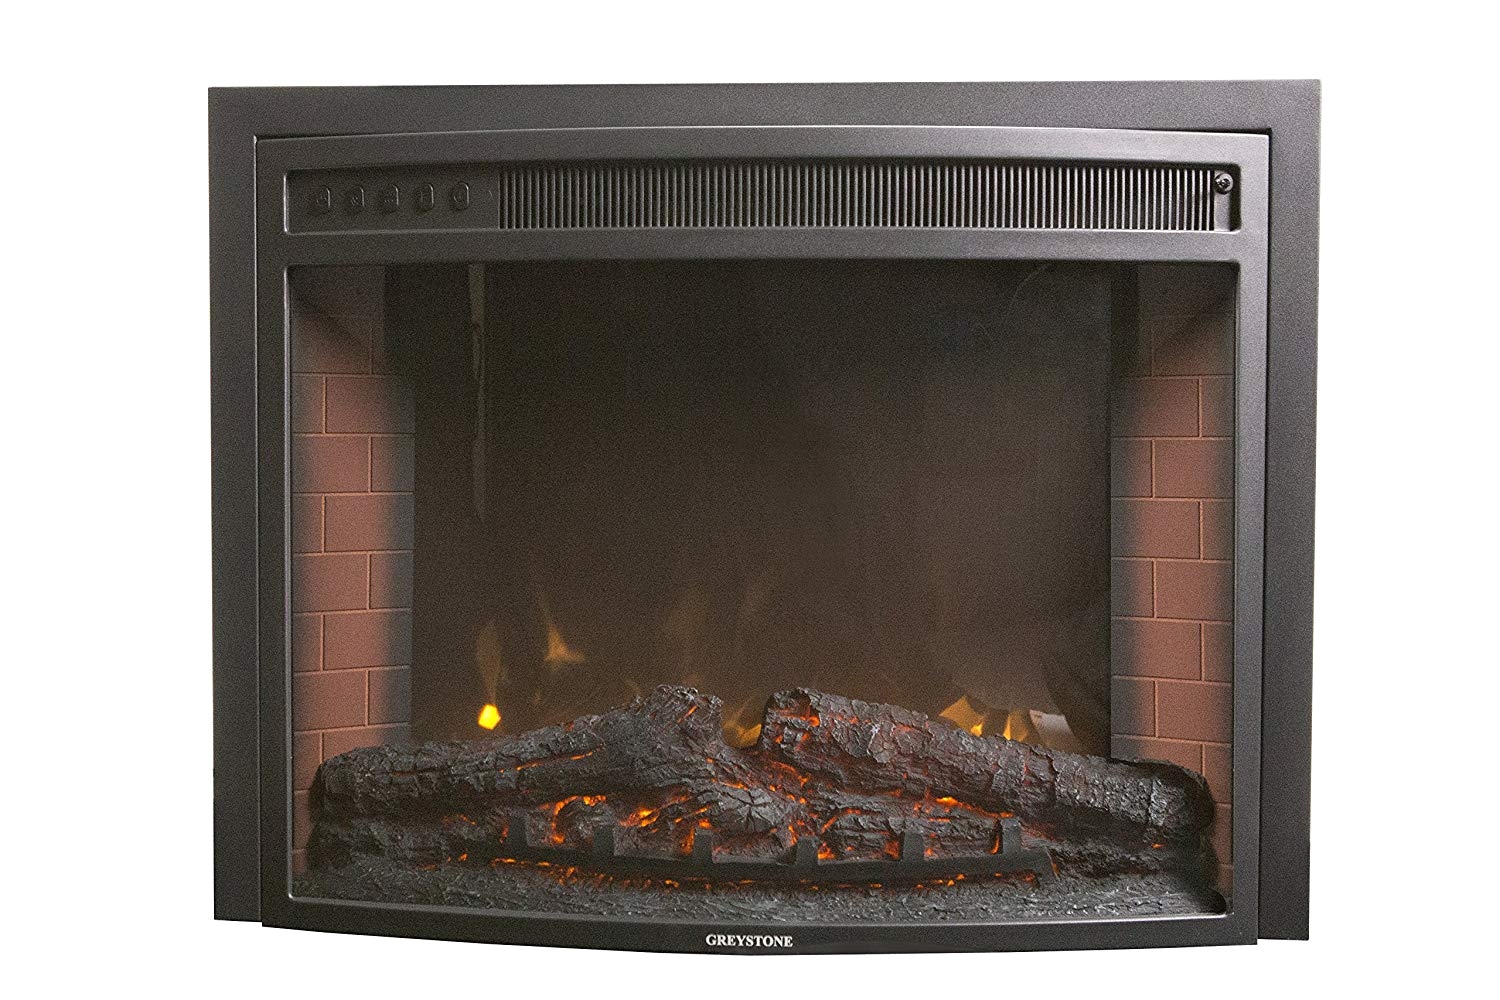 amazon com greystone f2625 26 curved electrical fireplace with led display remote and trim kit automotive